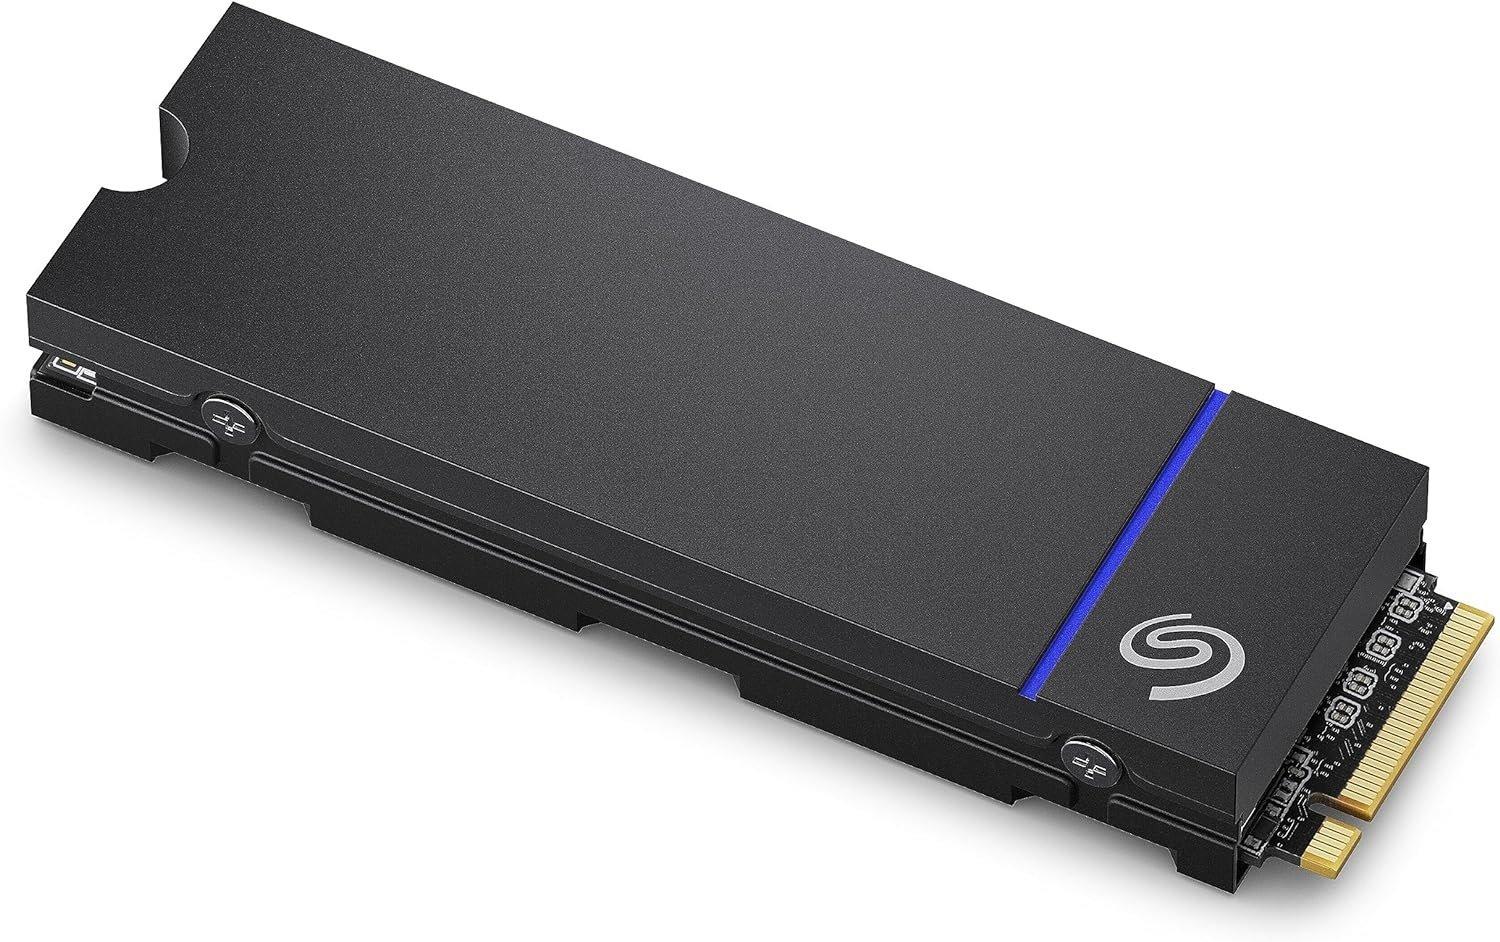 Seagate's Latest Game Drives For PlayStation Include Gorgeous